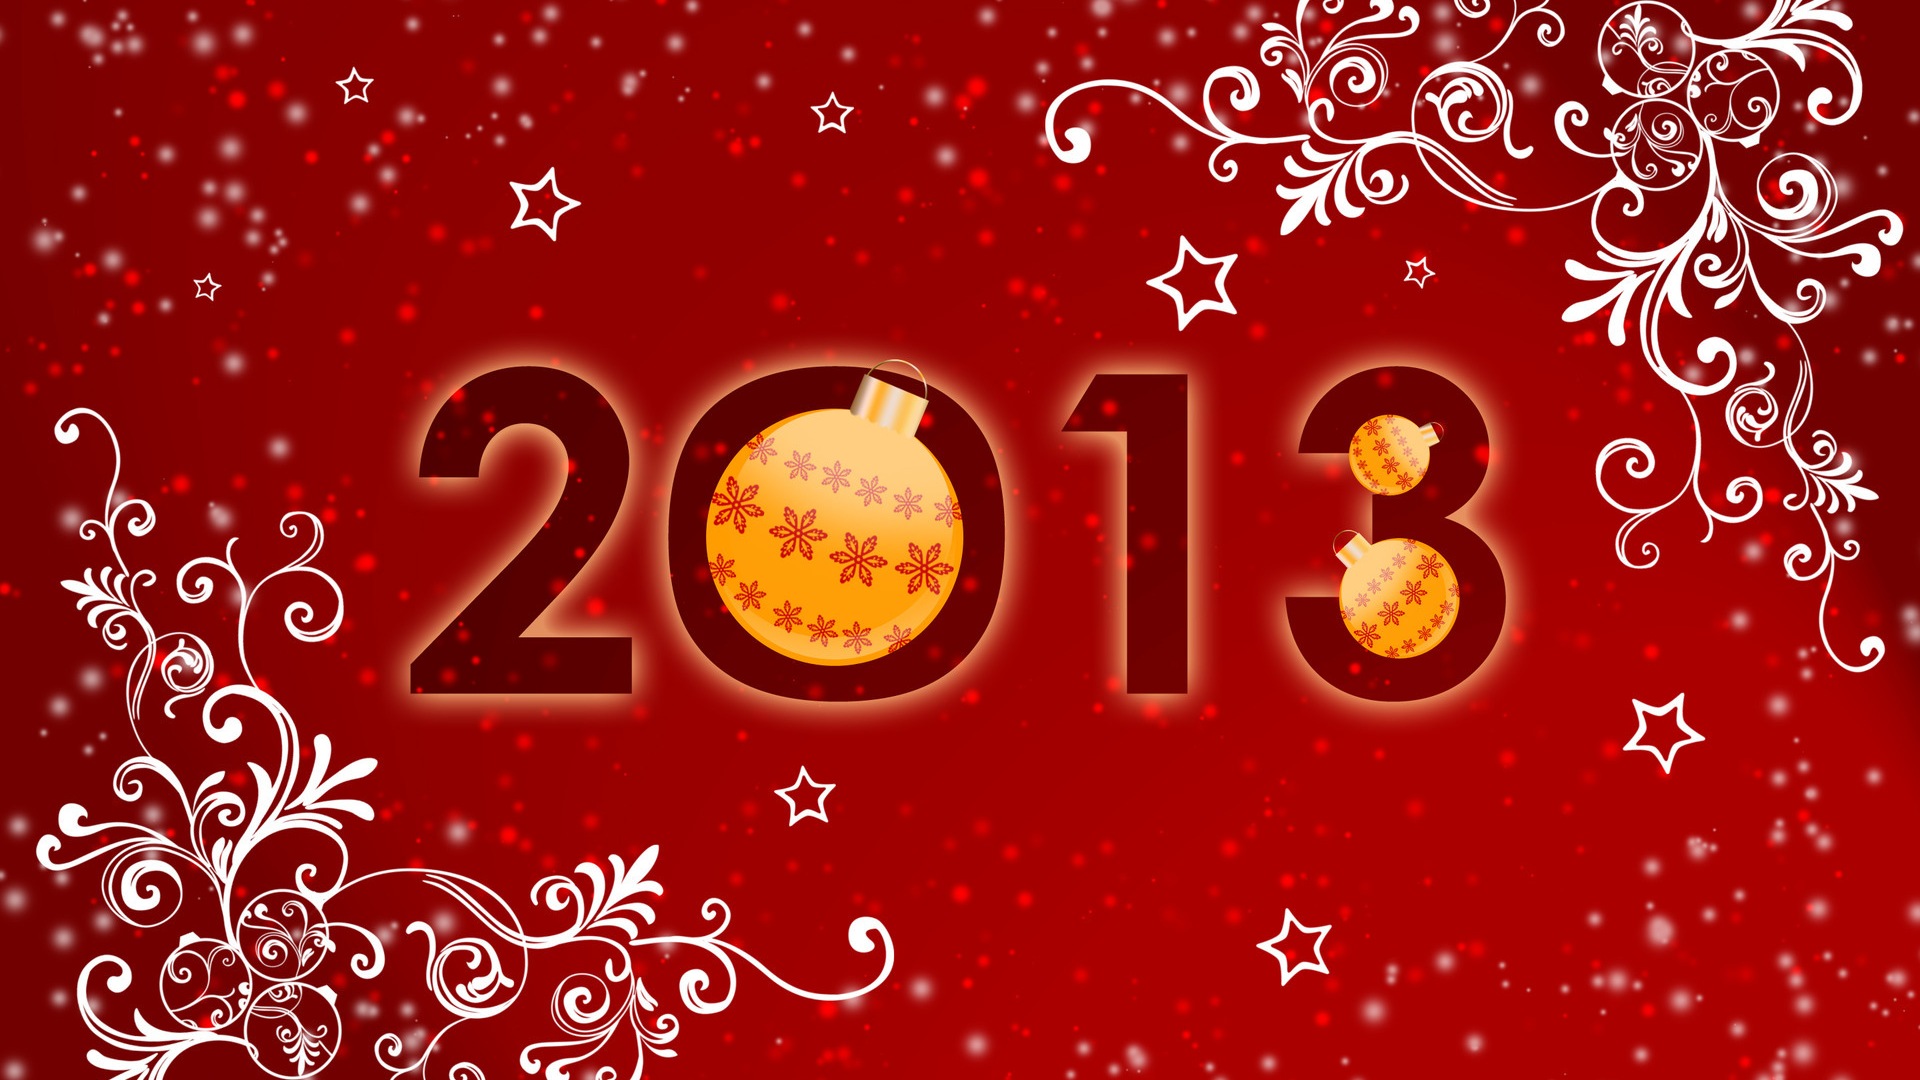 2013 Silvester Thema kreative Tapete (1) #13 - 1920x1080